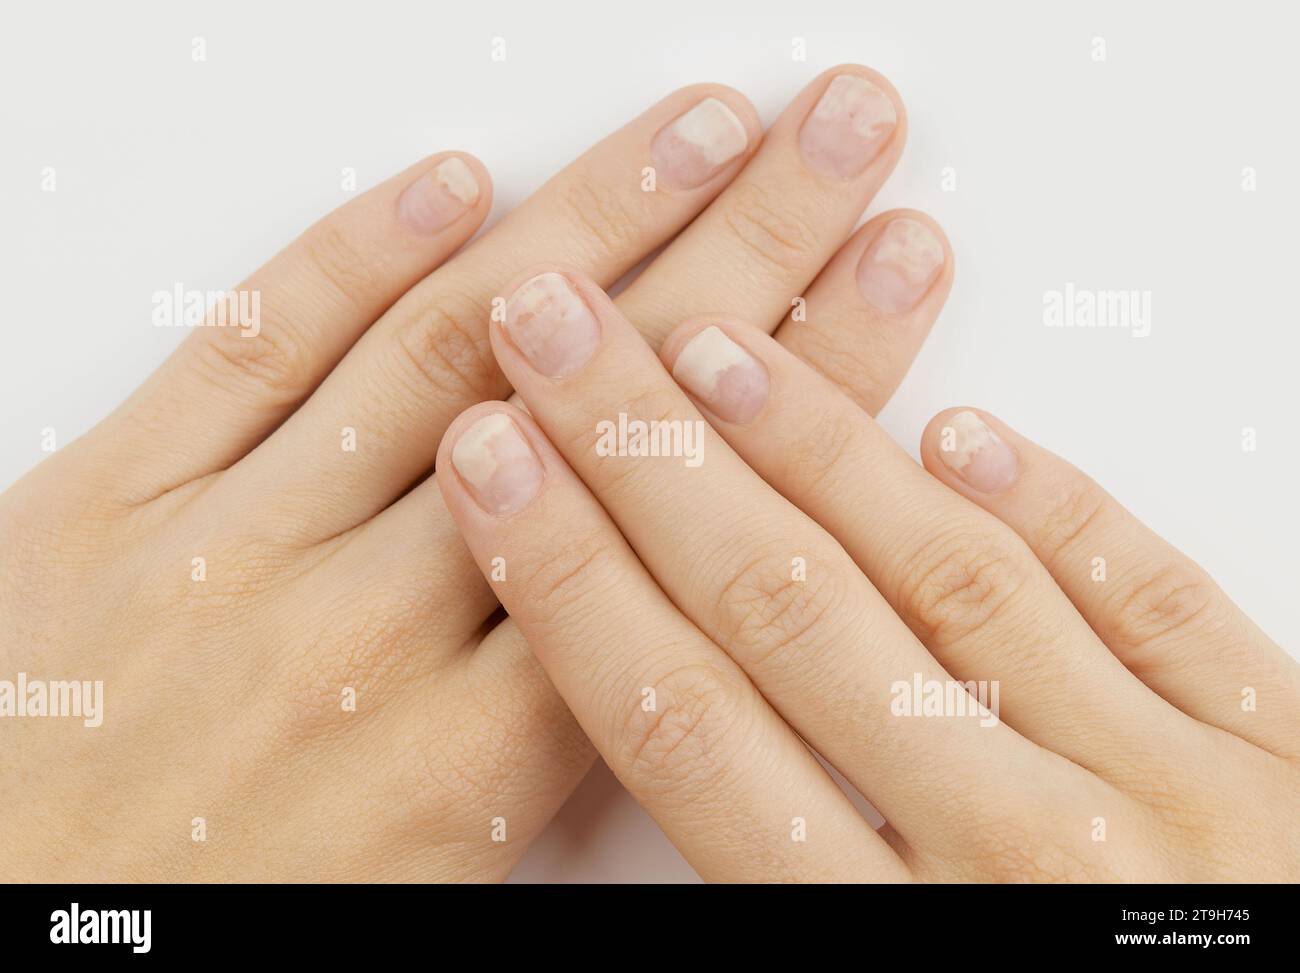 Fingernails with onycholysis after removing gel polish on grey background. Womans hands with damaged nails Stock Photo